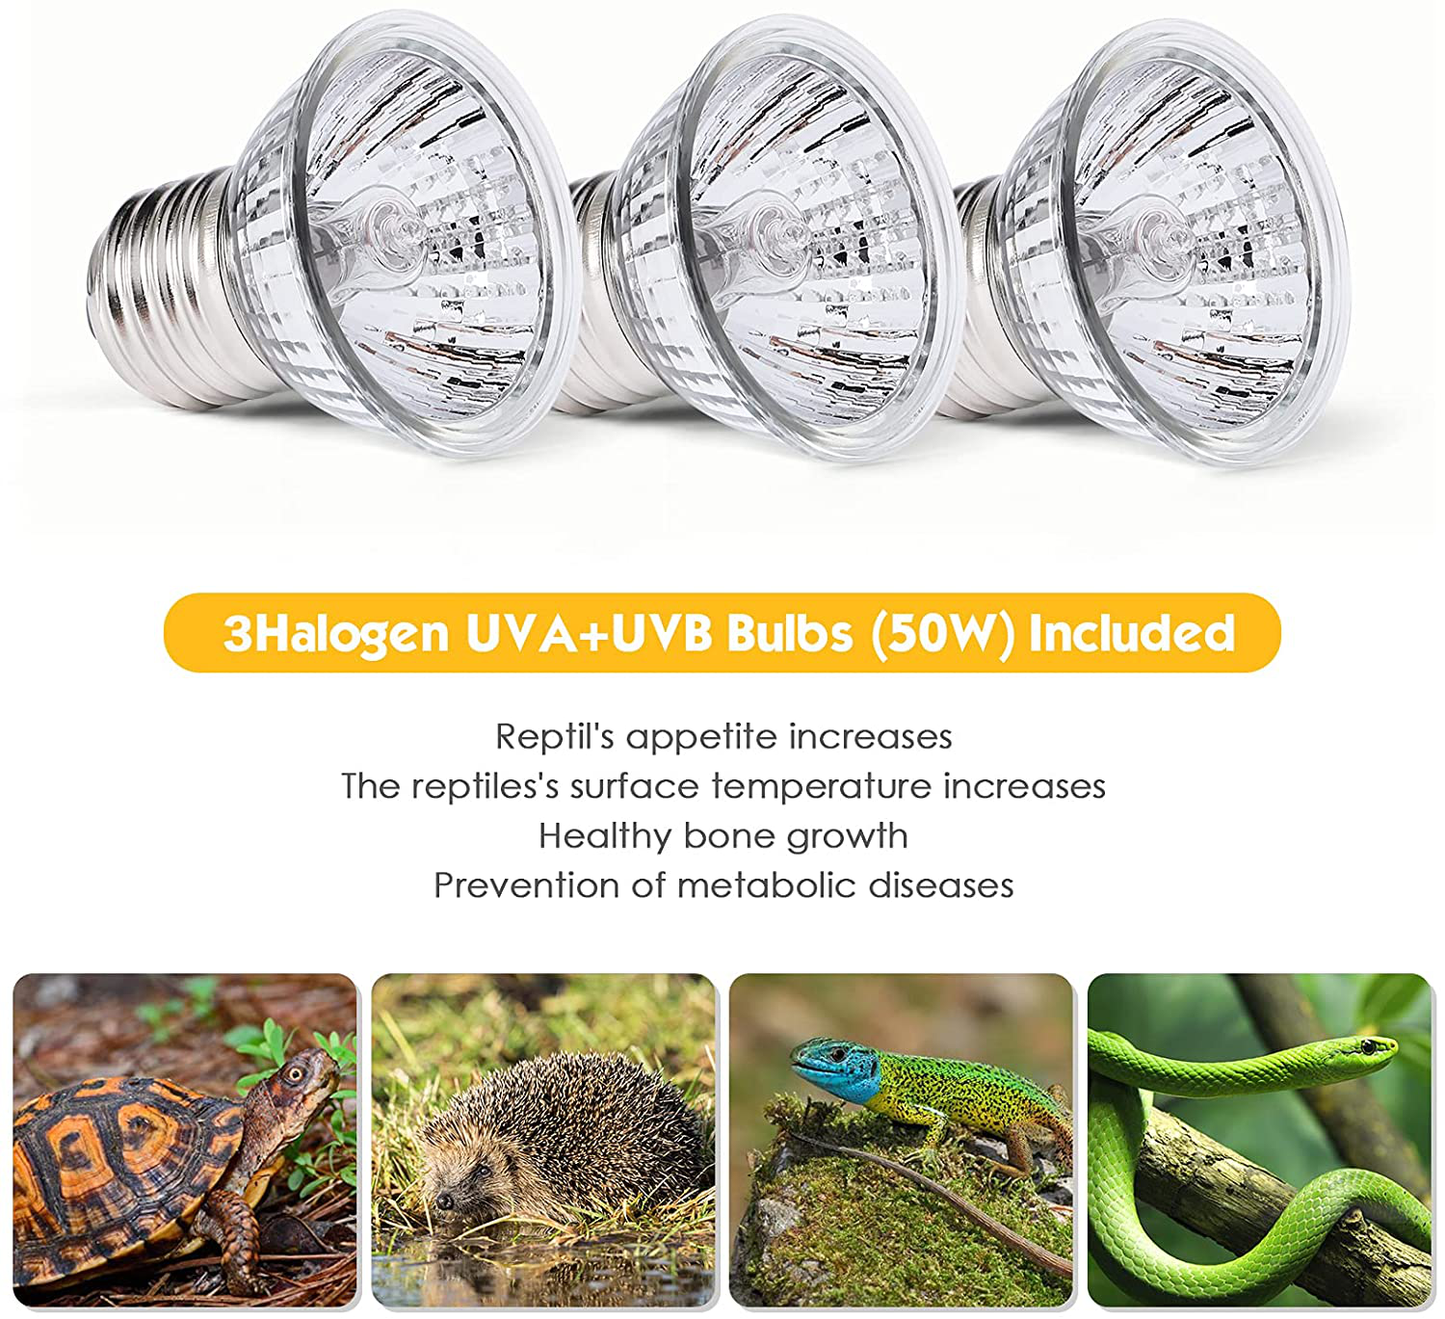 Jomddems Reptile Heat Lamp,Uvb Reptile Light with Holder&Switch,Uva UVB Reptile Lamp with Fixture for Lizard Turtle Snake Amphibian&Aquariaum(3Bulbs Included)(E27,110V)